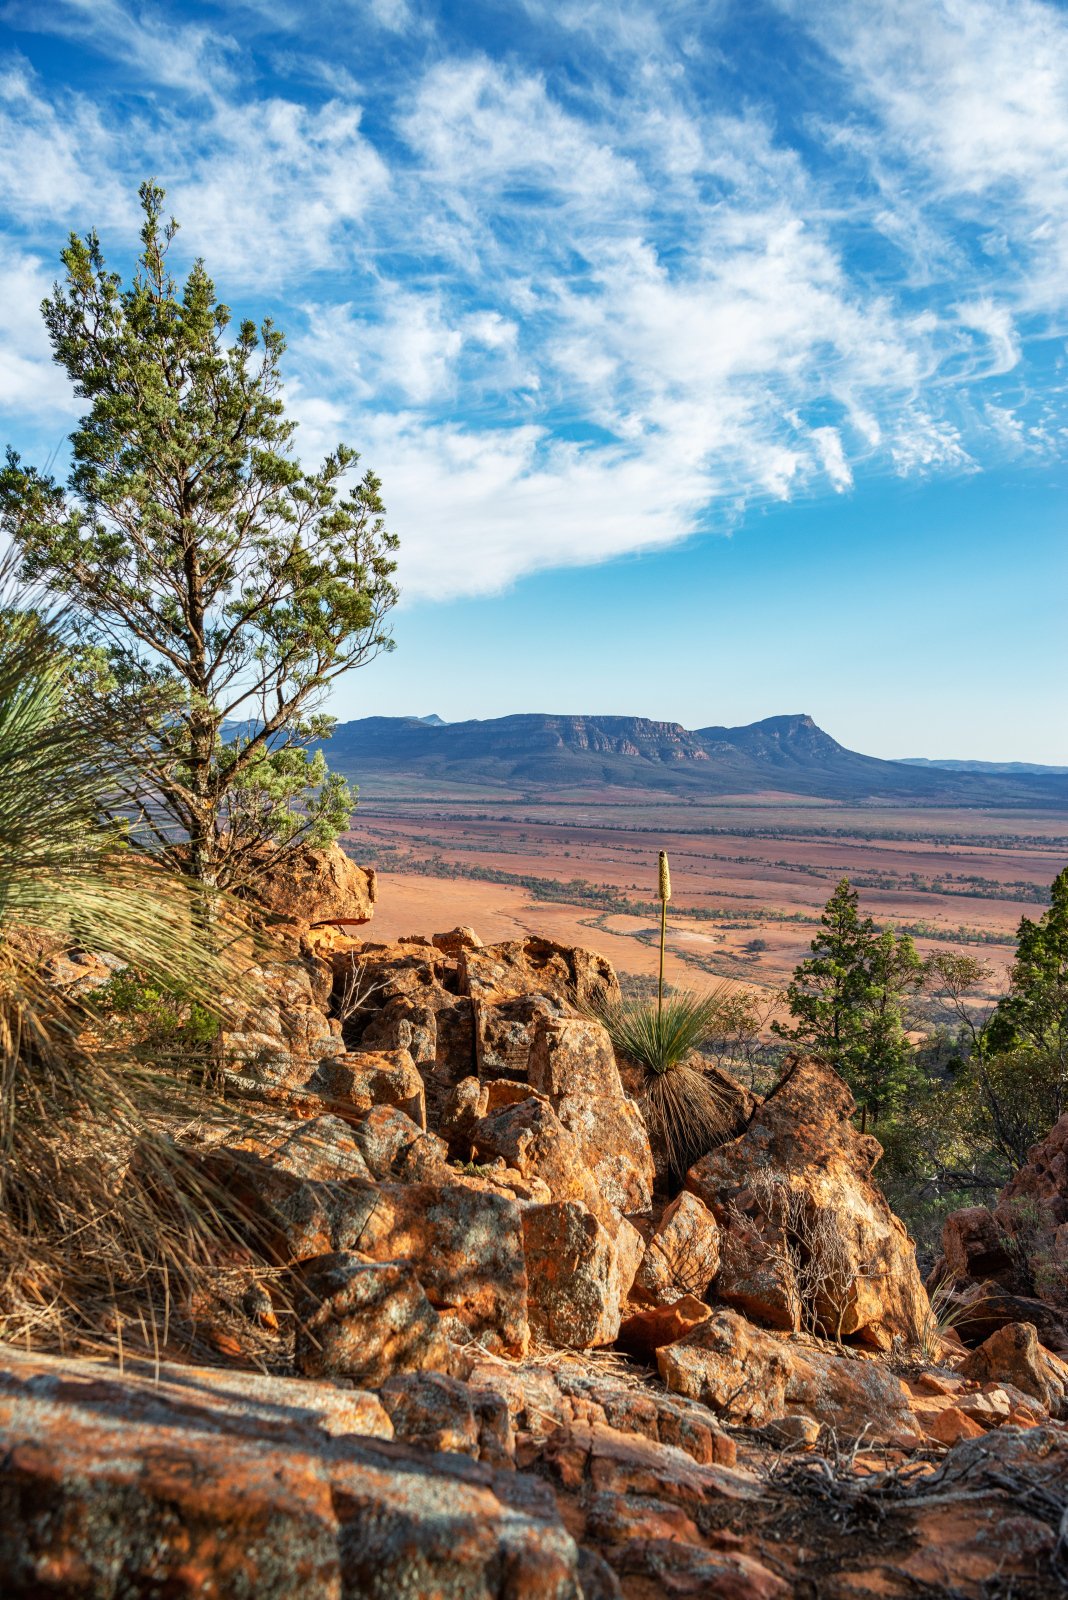 Take an epic Australian Road Trip through the heart of the Outback on the Explorer's Way